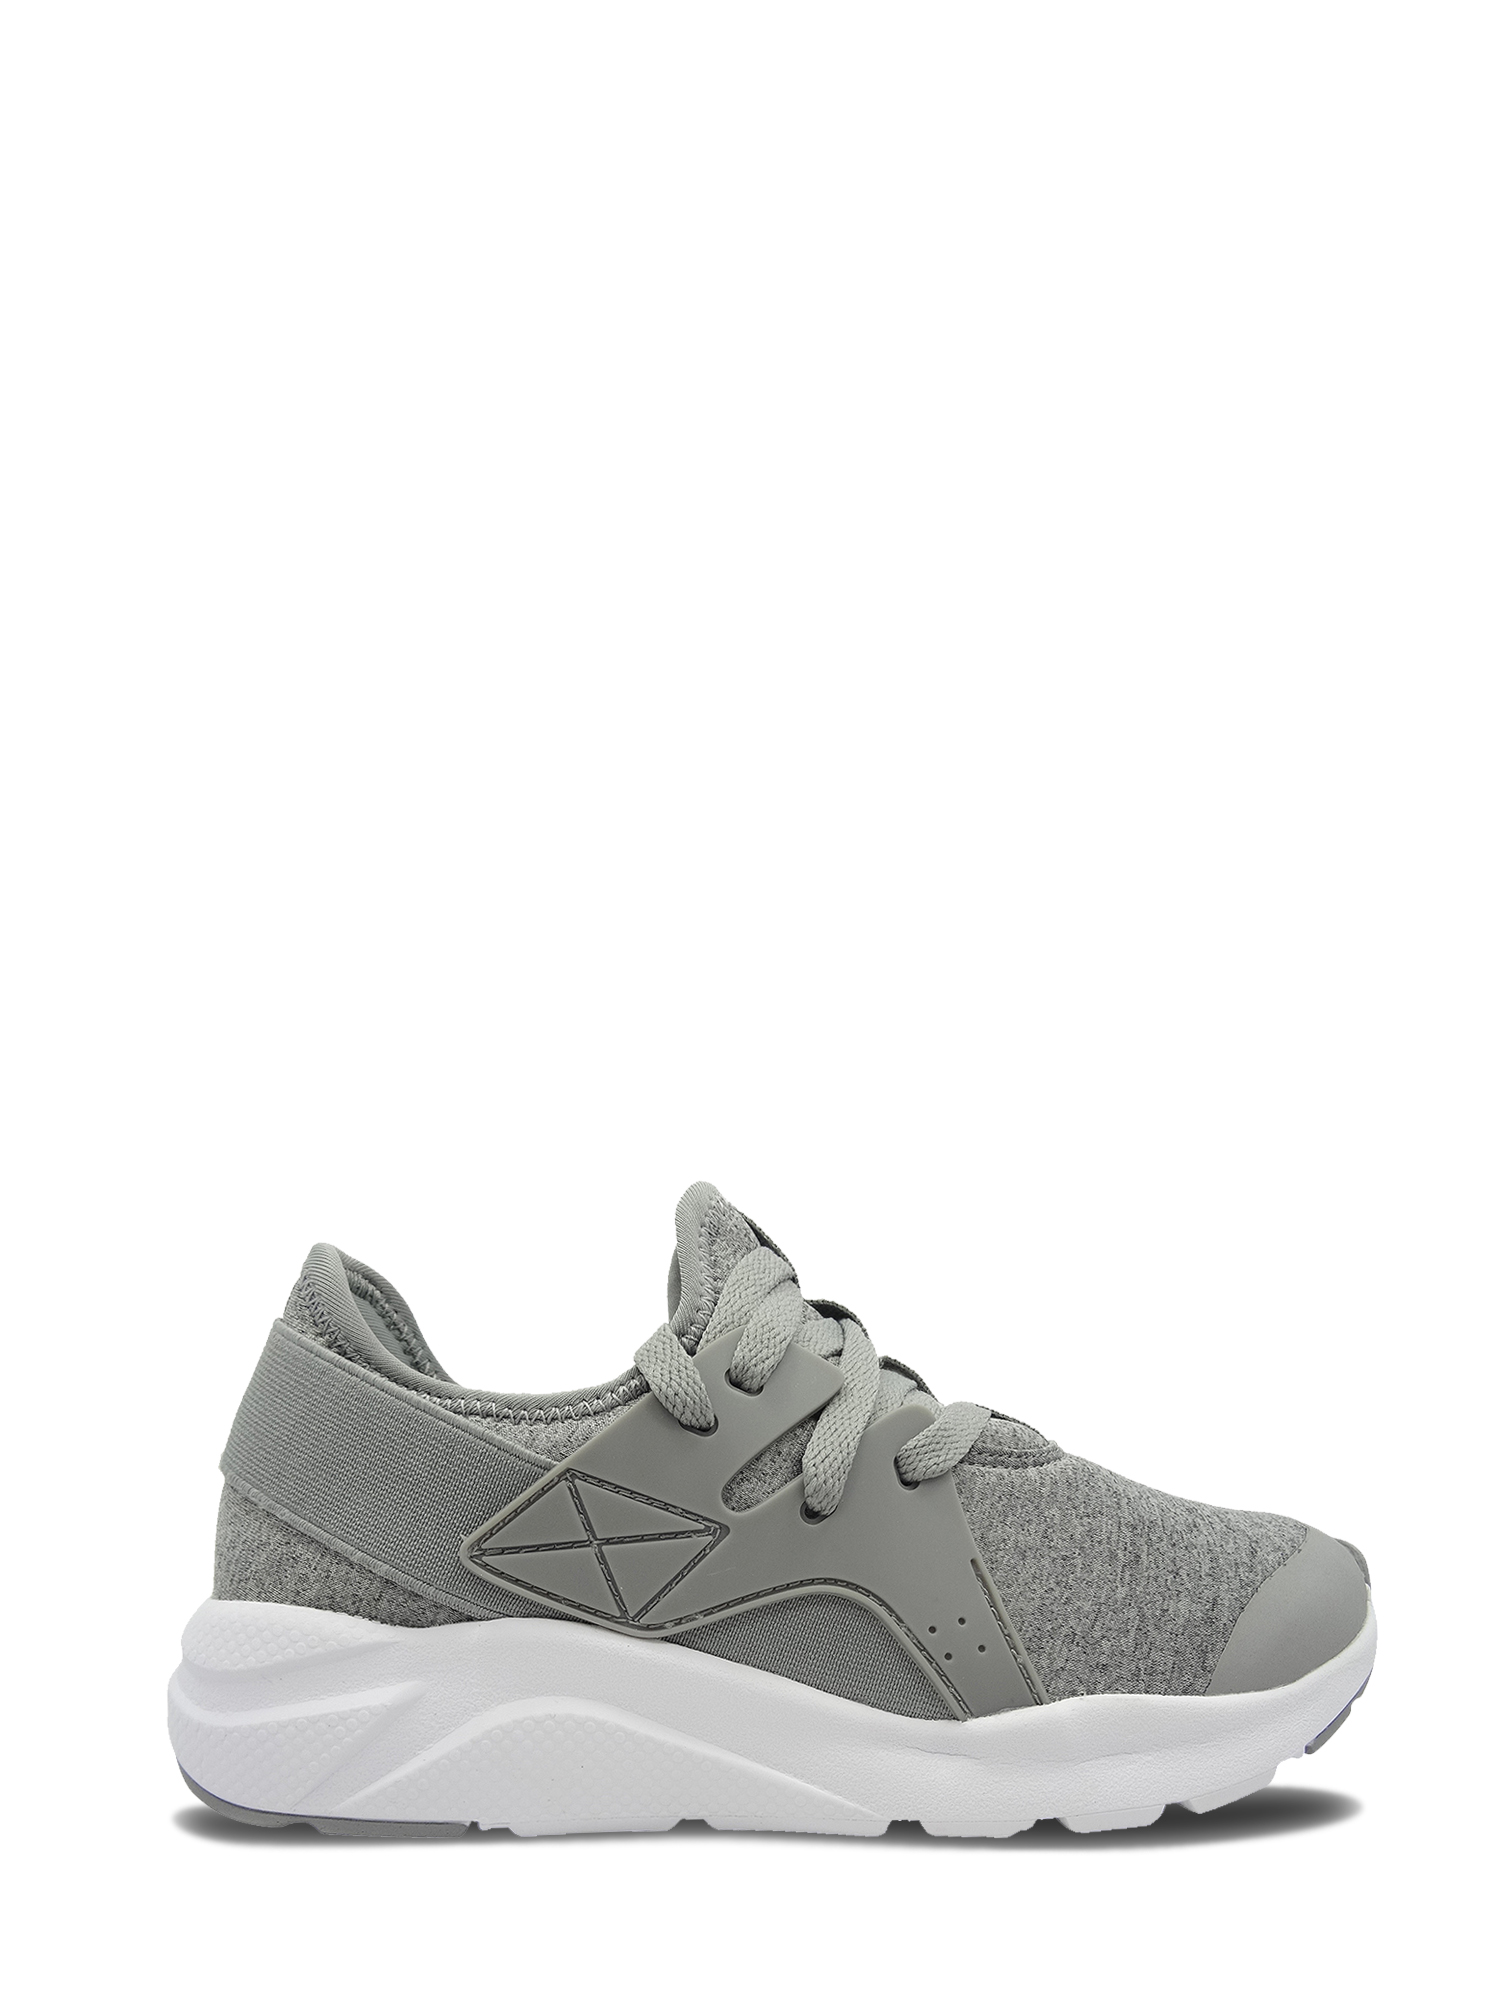 Women's Caged Mesh Athletic Shoe - image 5 of 5